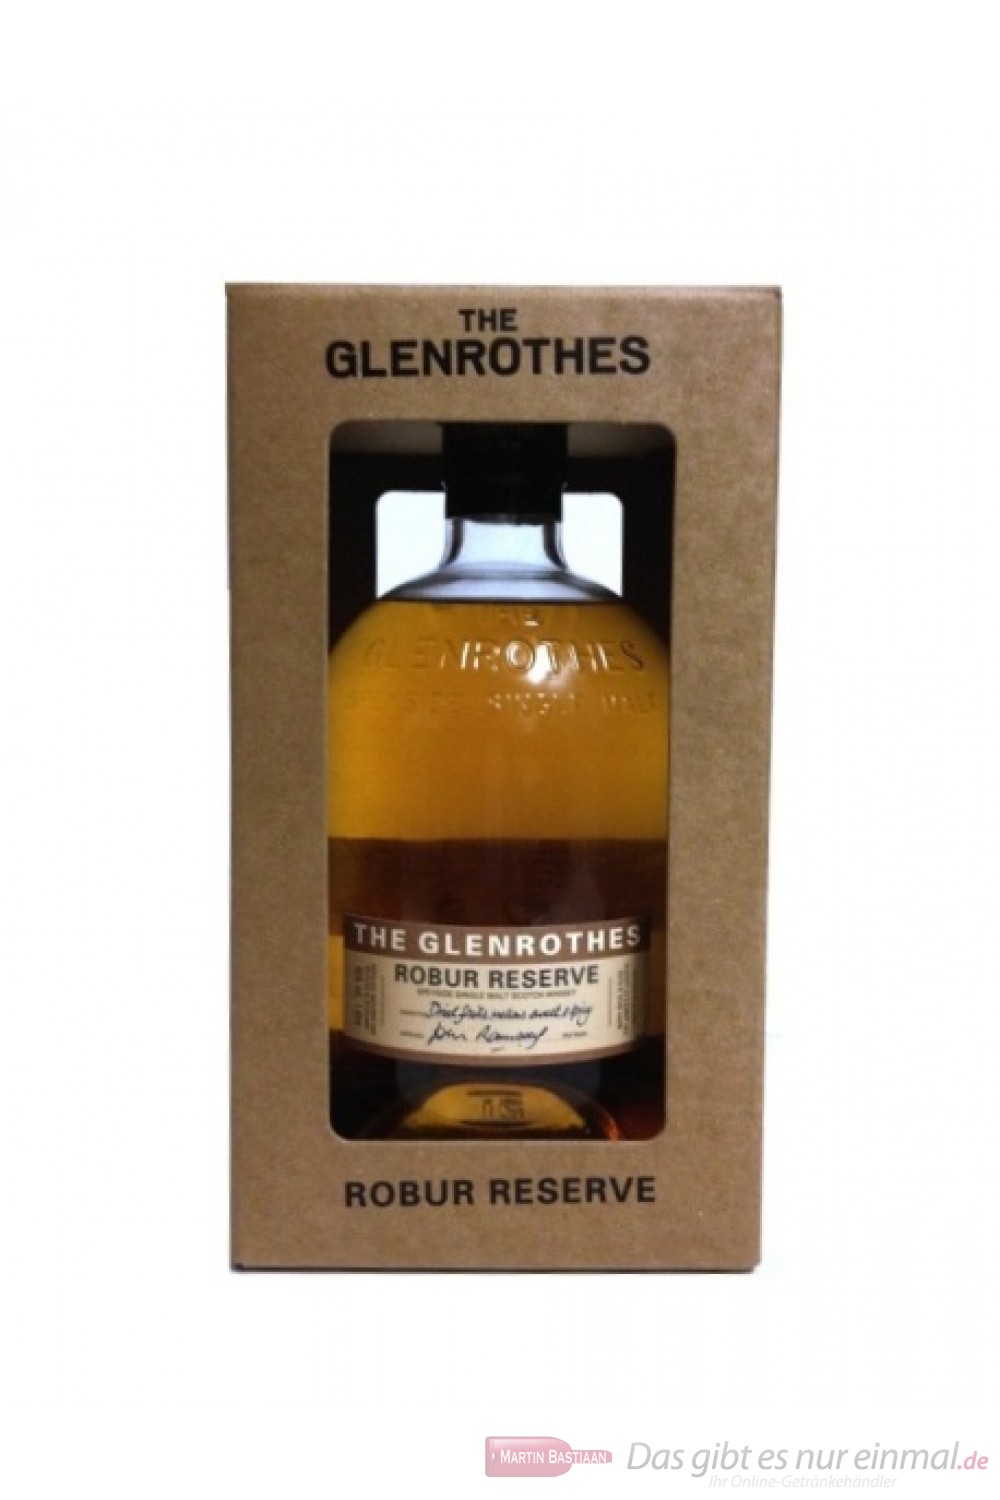 The Glenrothes Robur Reserve